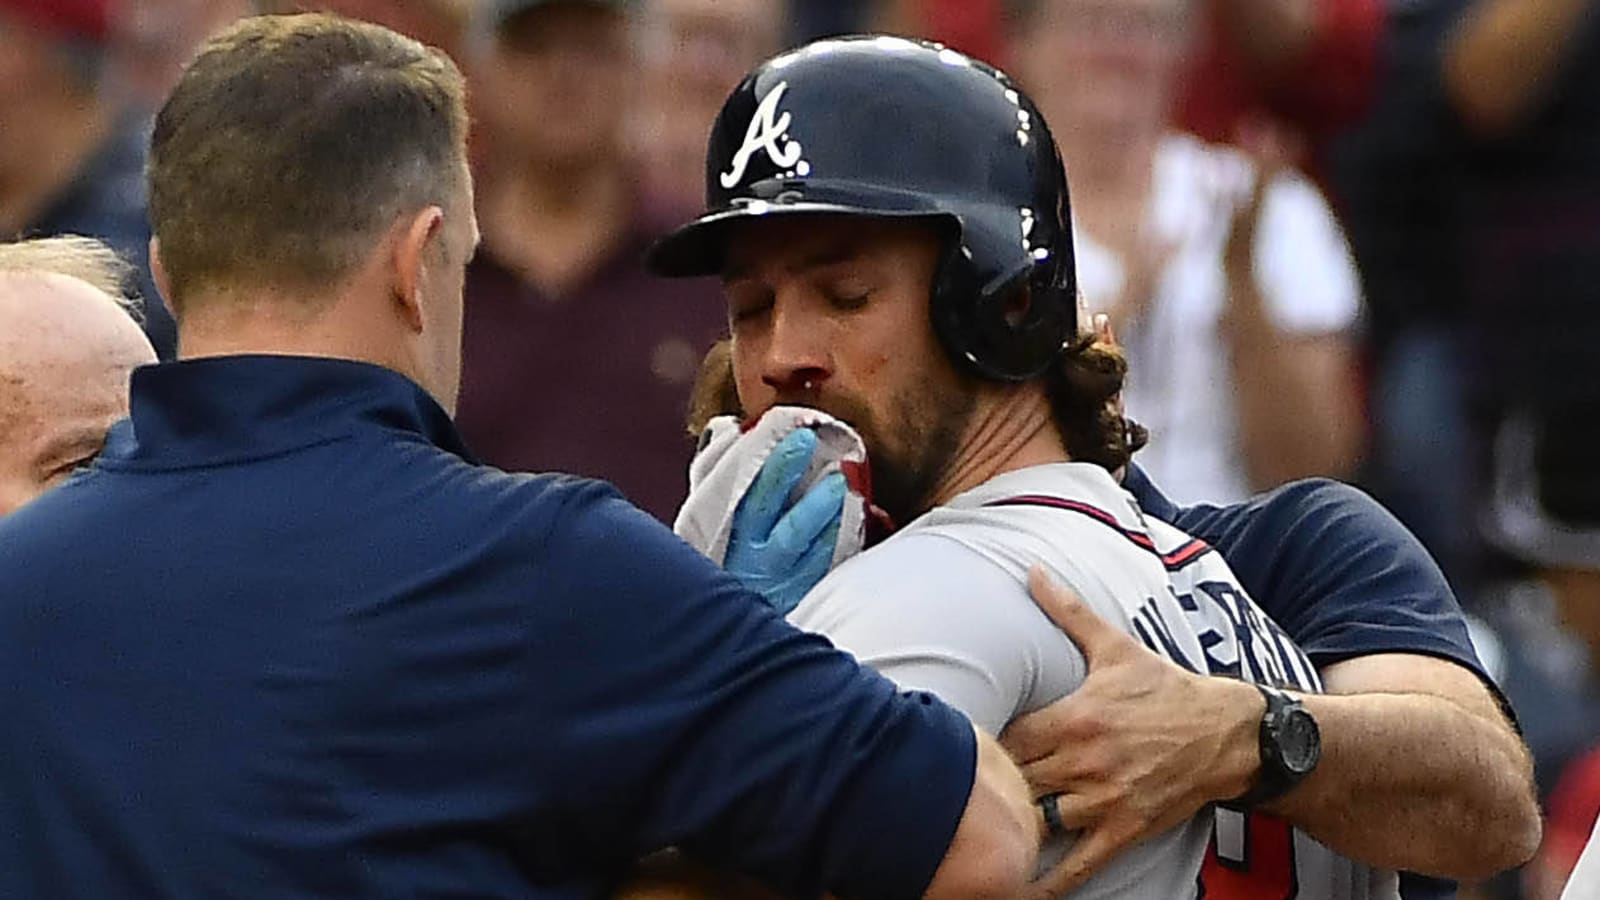 Charlie Culberson suffers facial fractures after getting hit by pitch